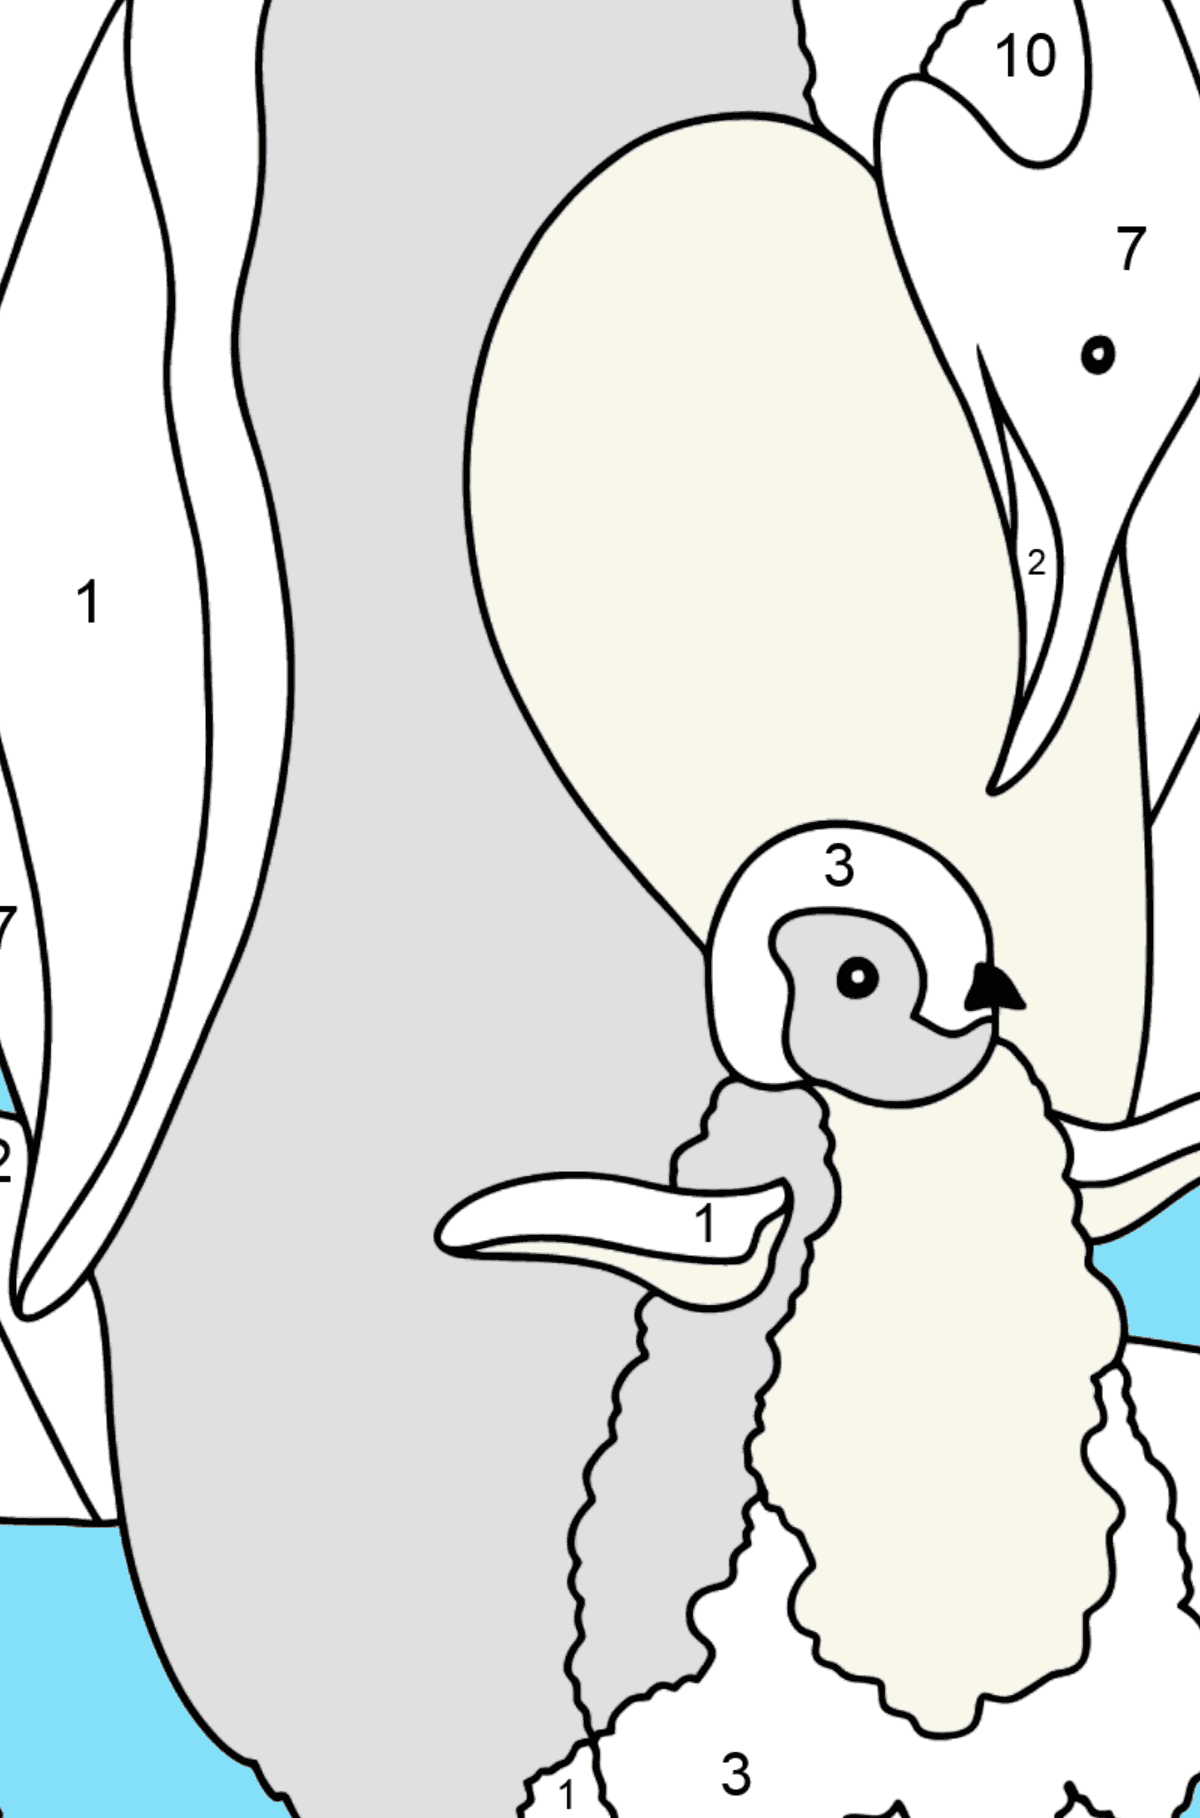 Coloring Page - A Penguin with a Penguin Chick - Coloring by Numbers for Kids